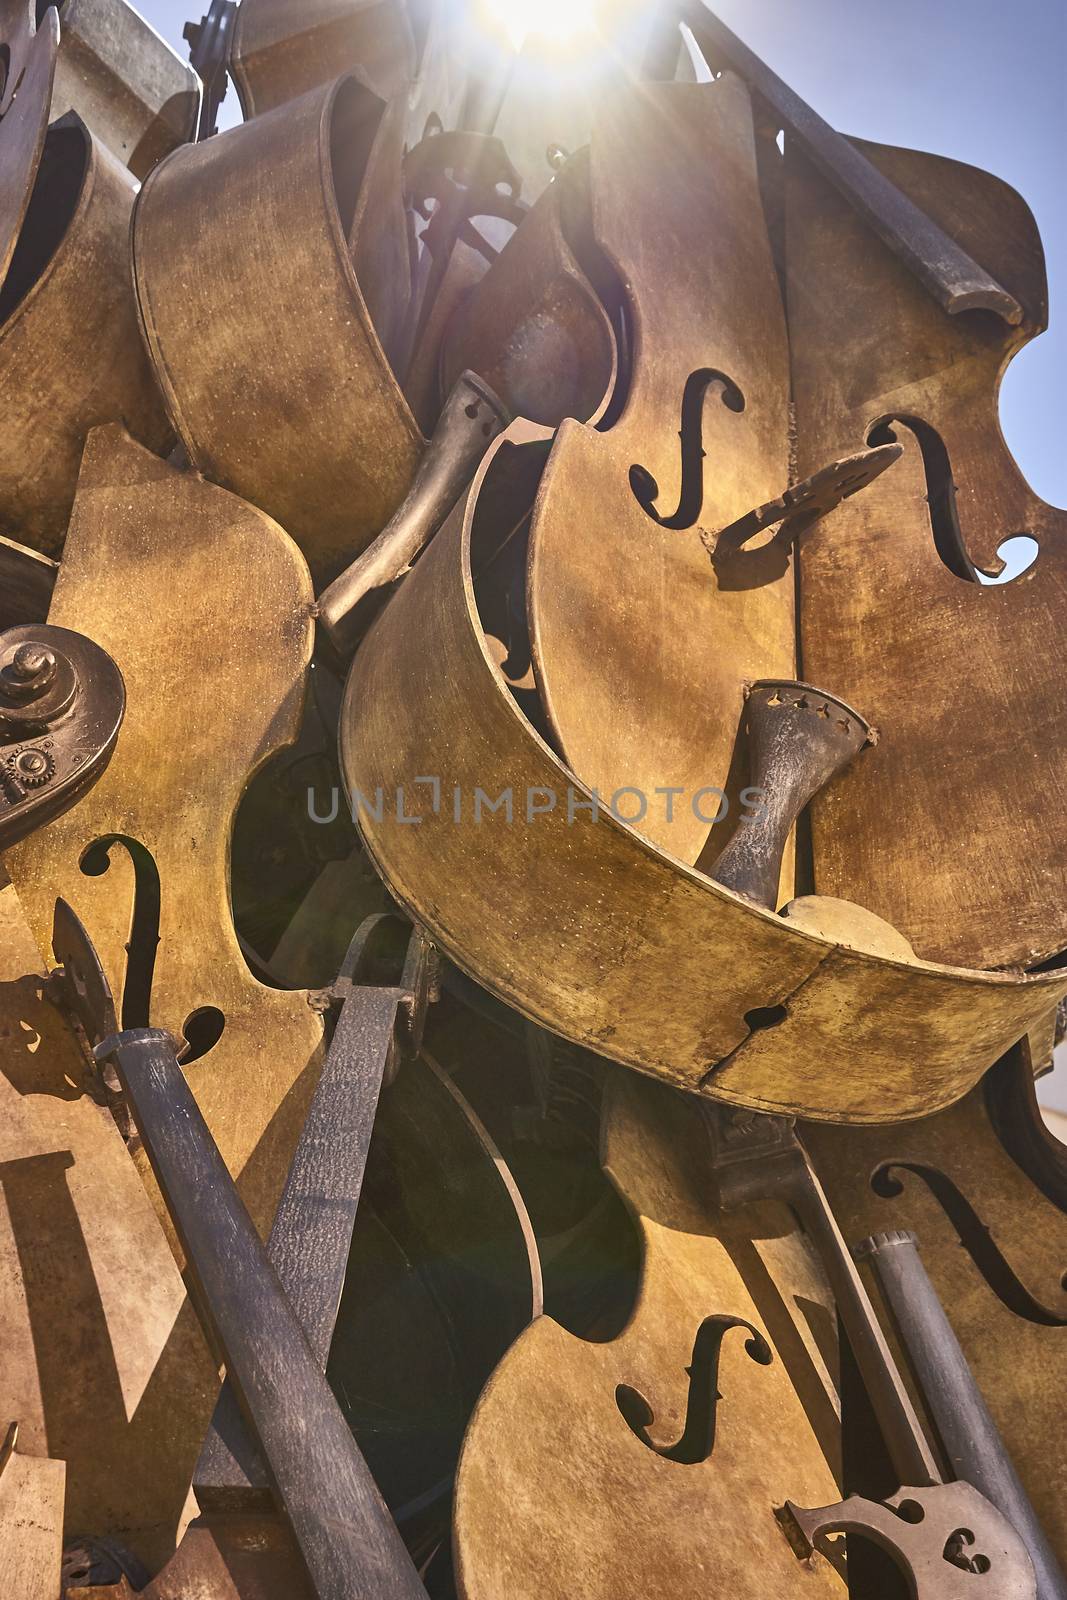 Old vintage violins are now reduced to pieces and packed in a unique pile. Vertical Shot.